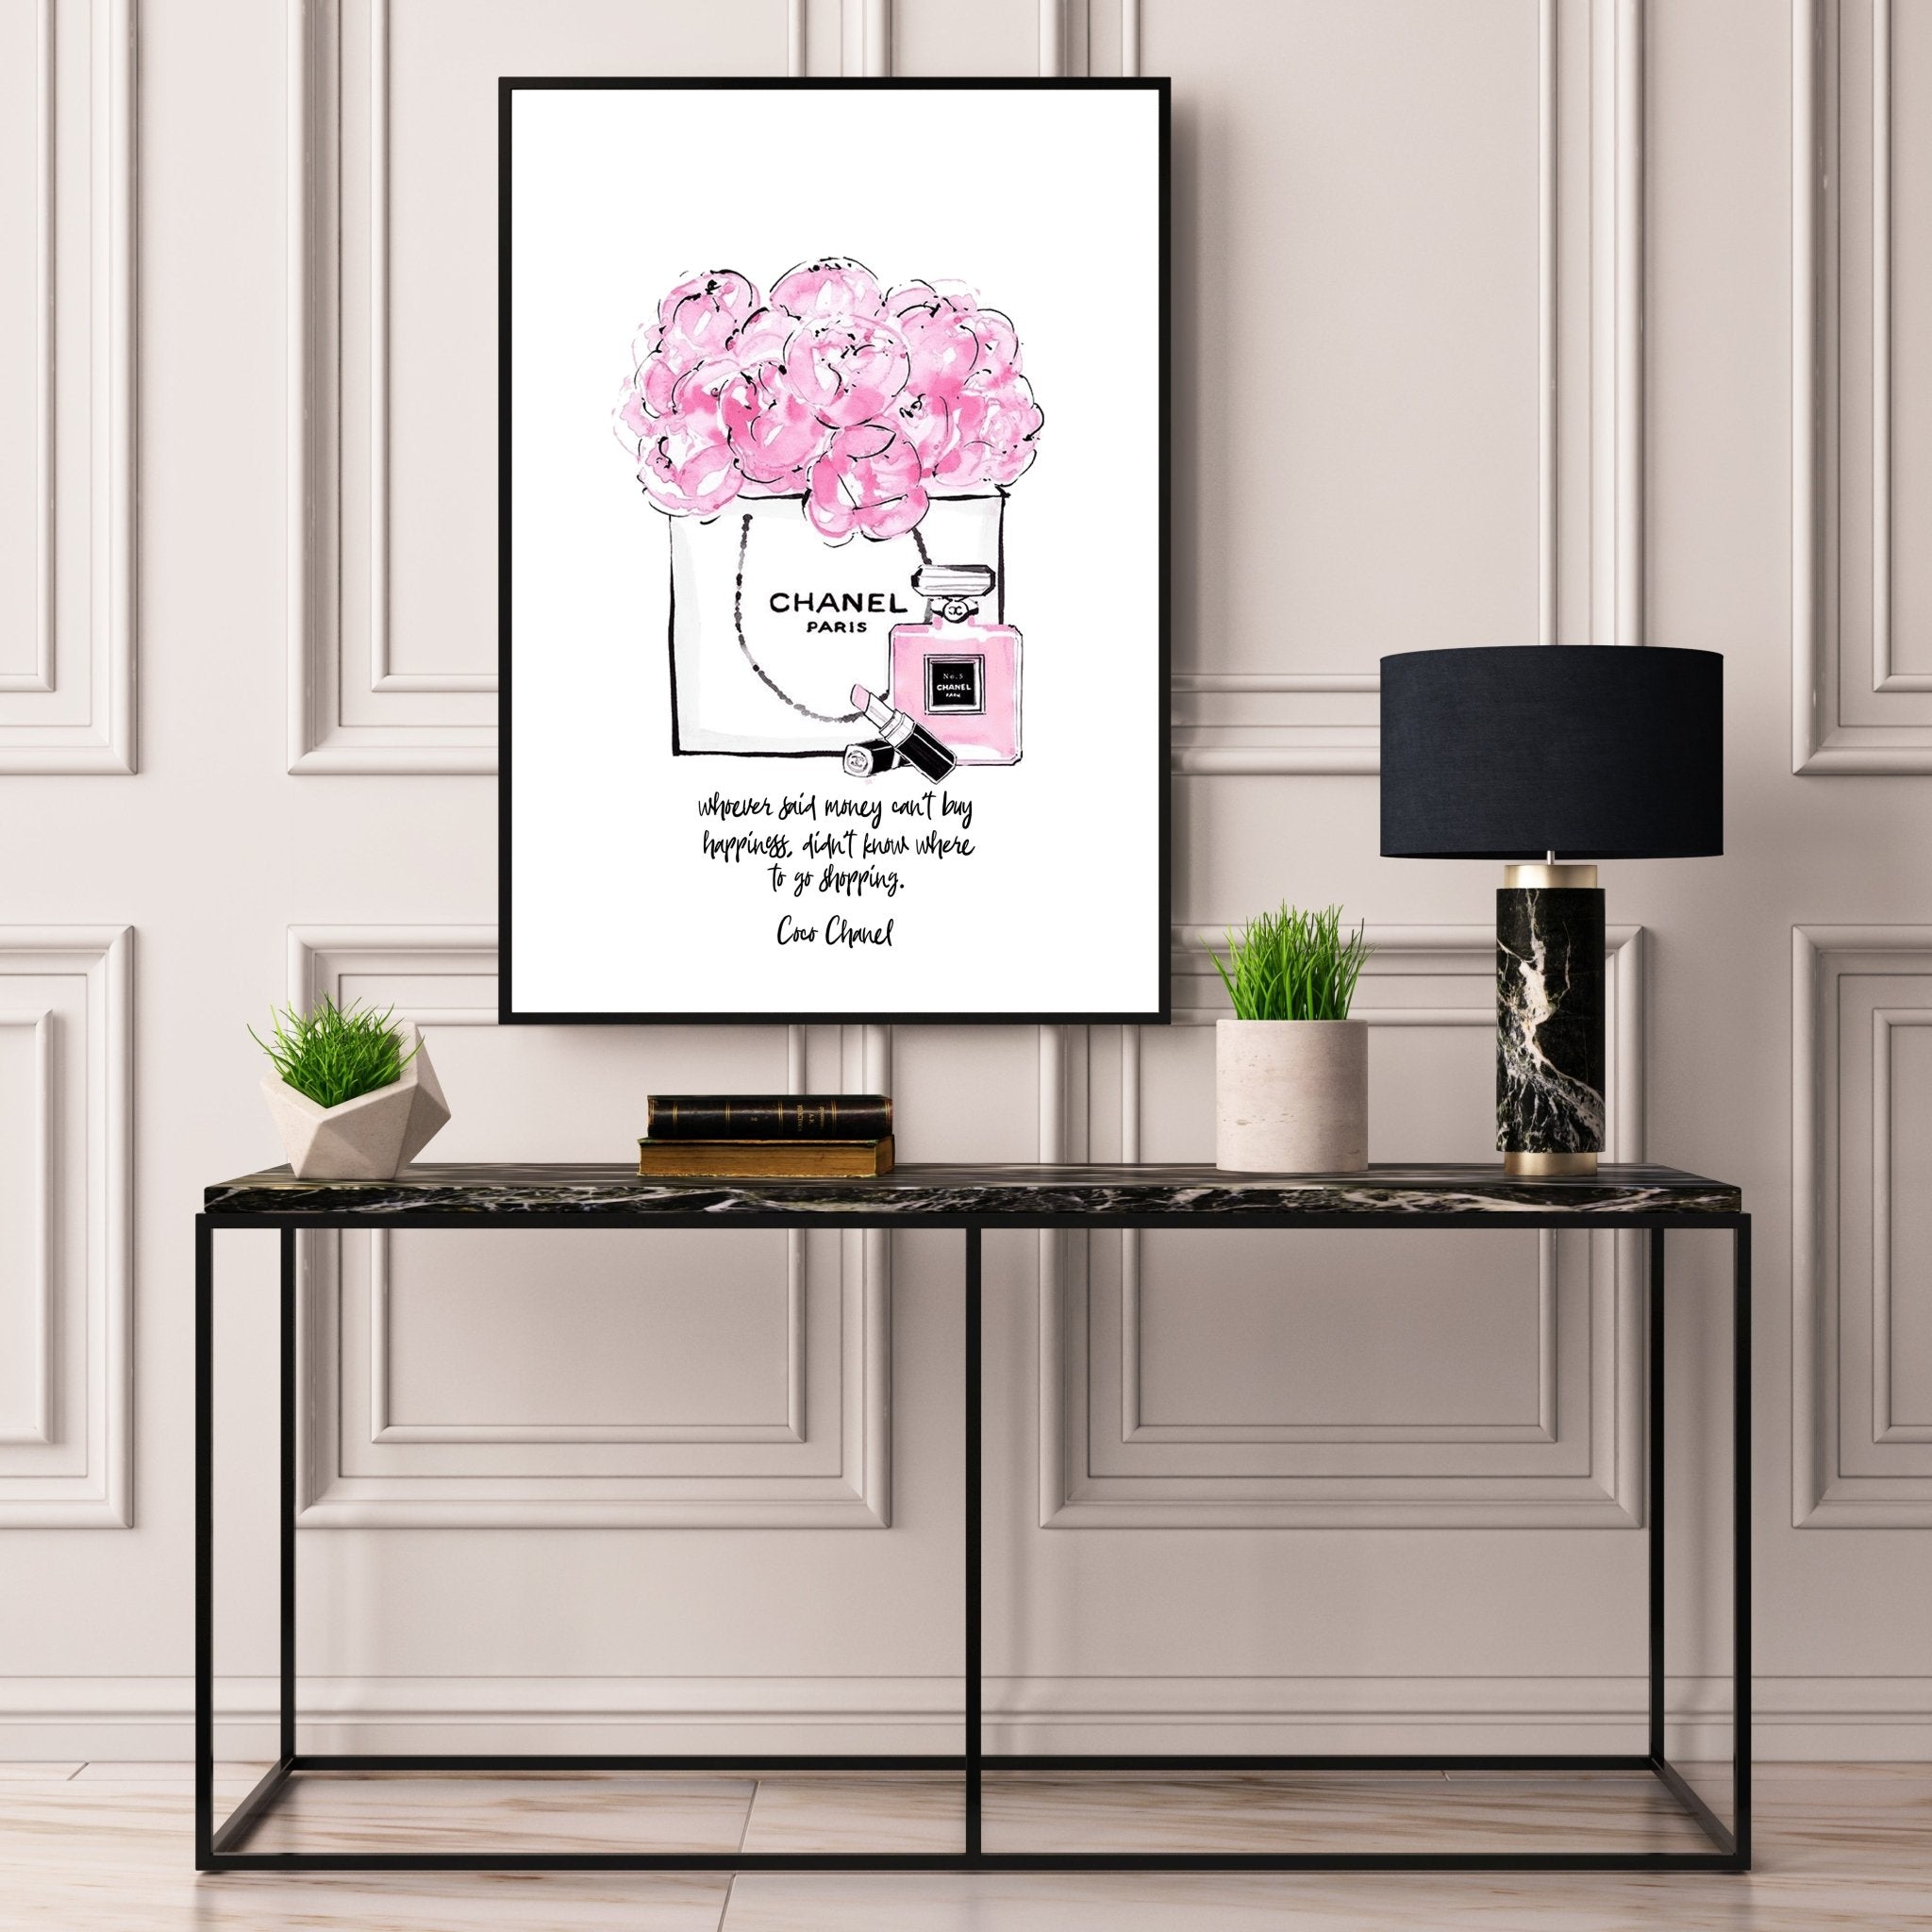 Whoever Said Money Can't Buy Happiness II - D'Luxe Prints